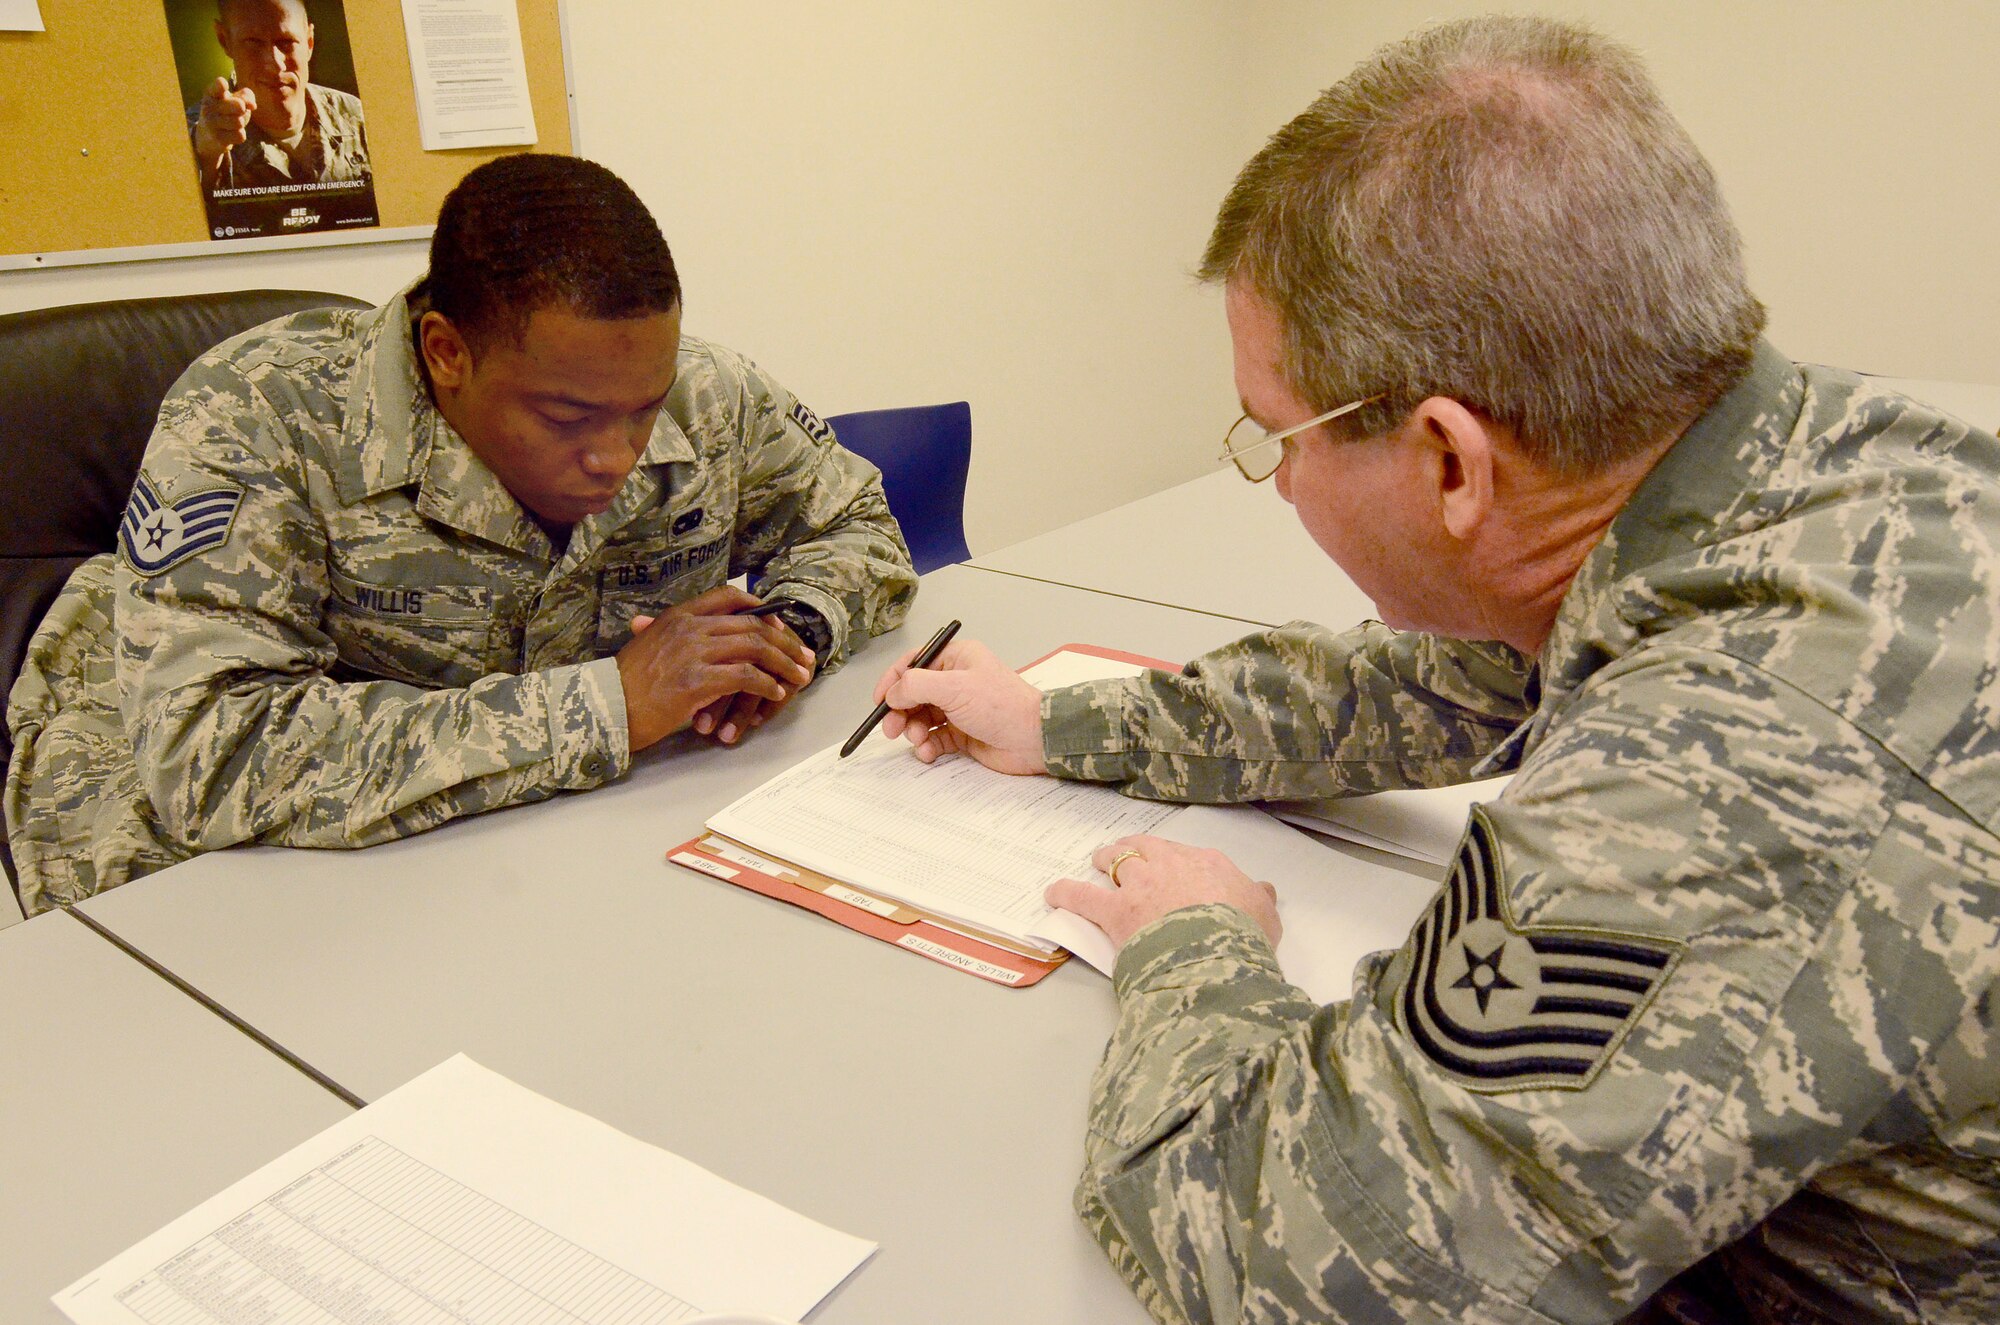 Staff Sgt. Andretti Willis reviews his mobility folder with Tech. Sgt. Alan McKibben, to ensure all information is correct and up to date for his deployment to Southwest Asia; Dobbins Air Reserve Base, Ga., Jan. 2, 2015. (U.S. Air Force photo/Brad Fallin)